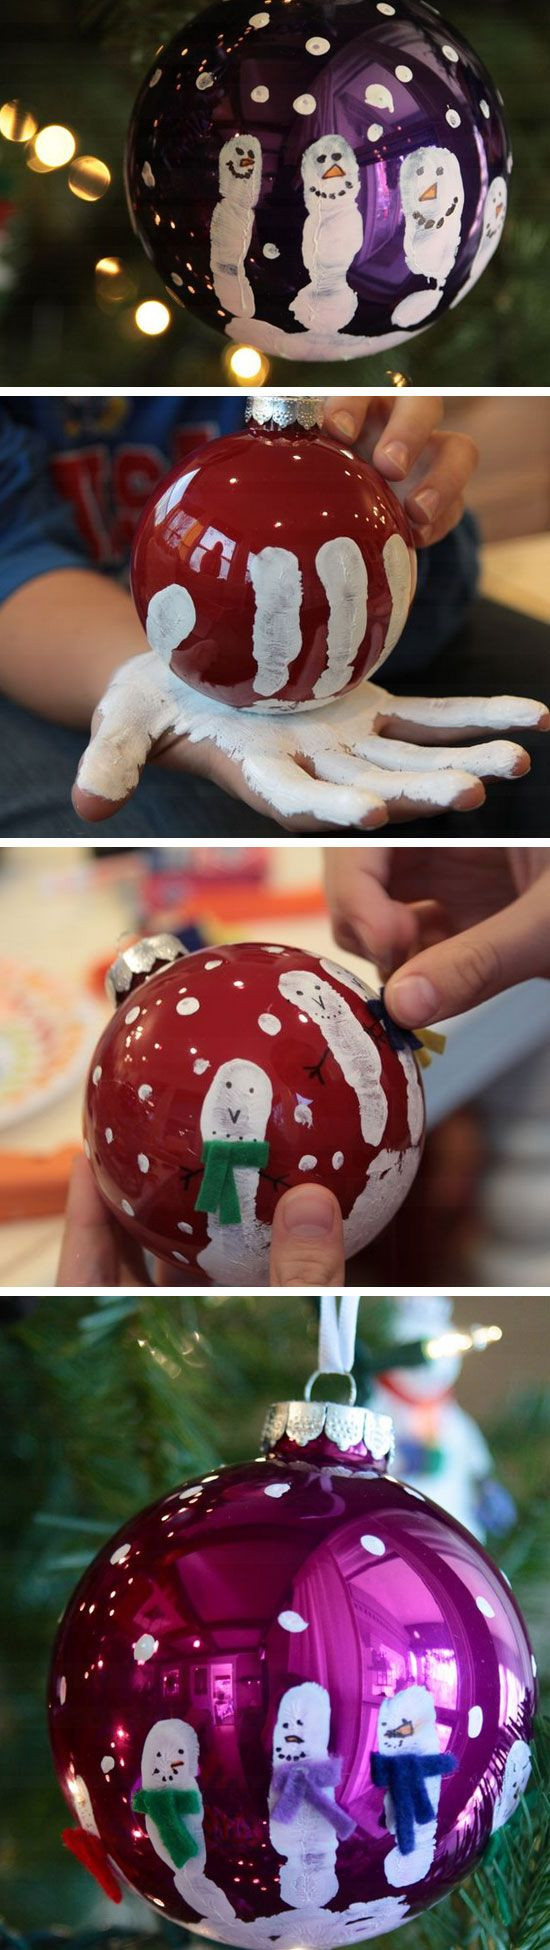 Craft For Christmas Ideas
 Easy and Cute DIY Christmas Crafts for Kids to Make Hative